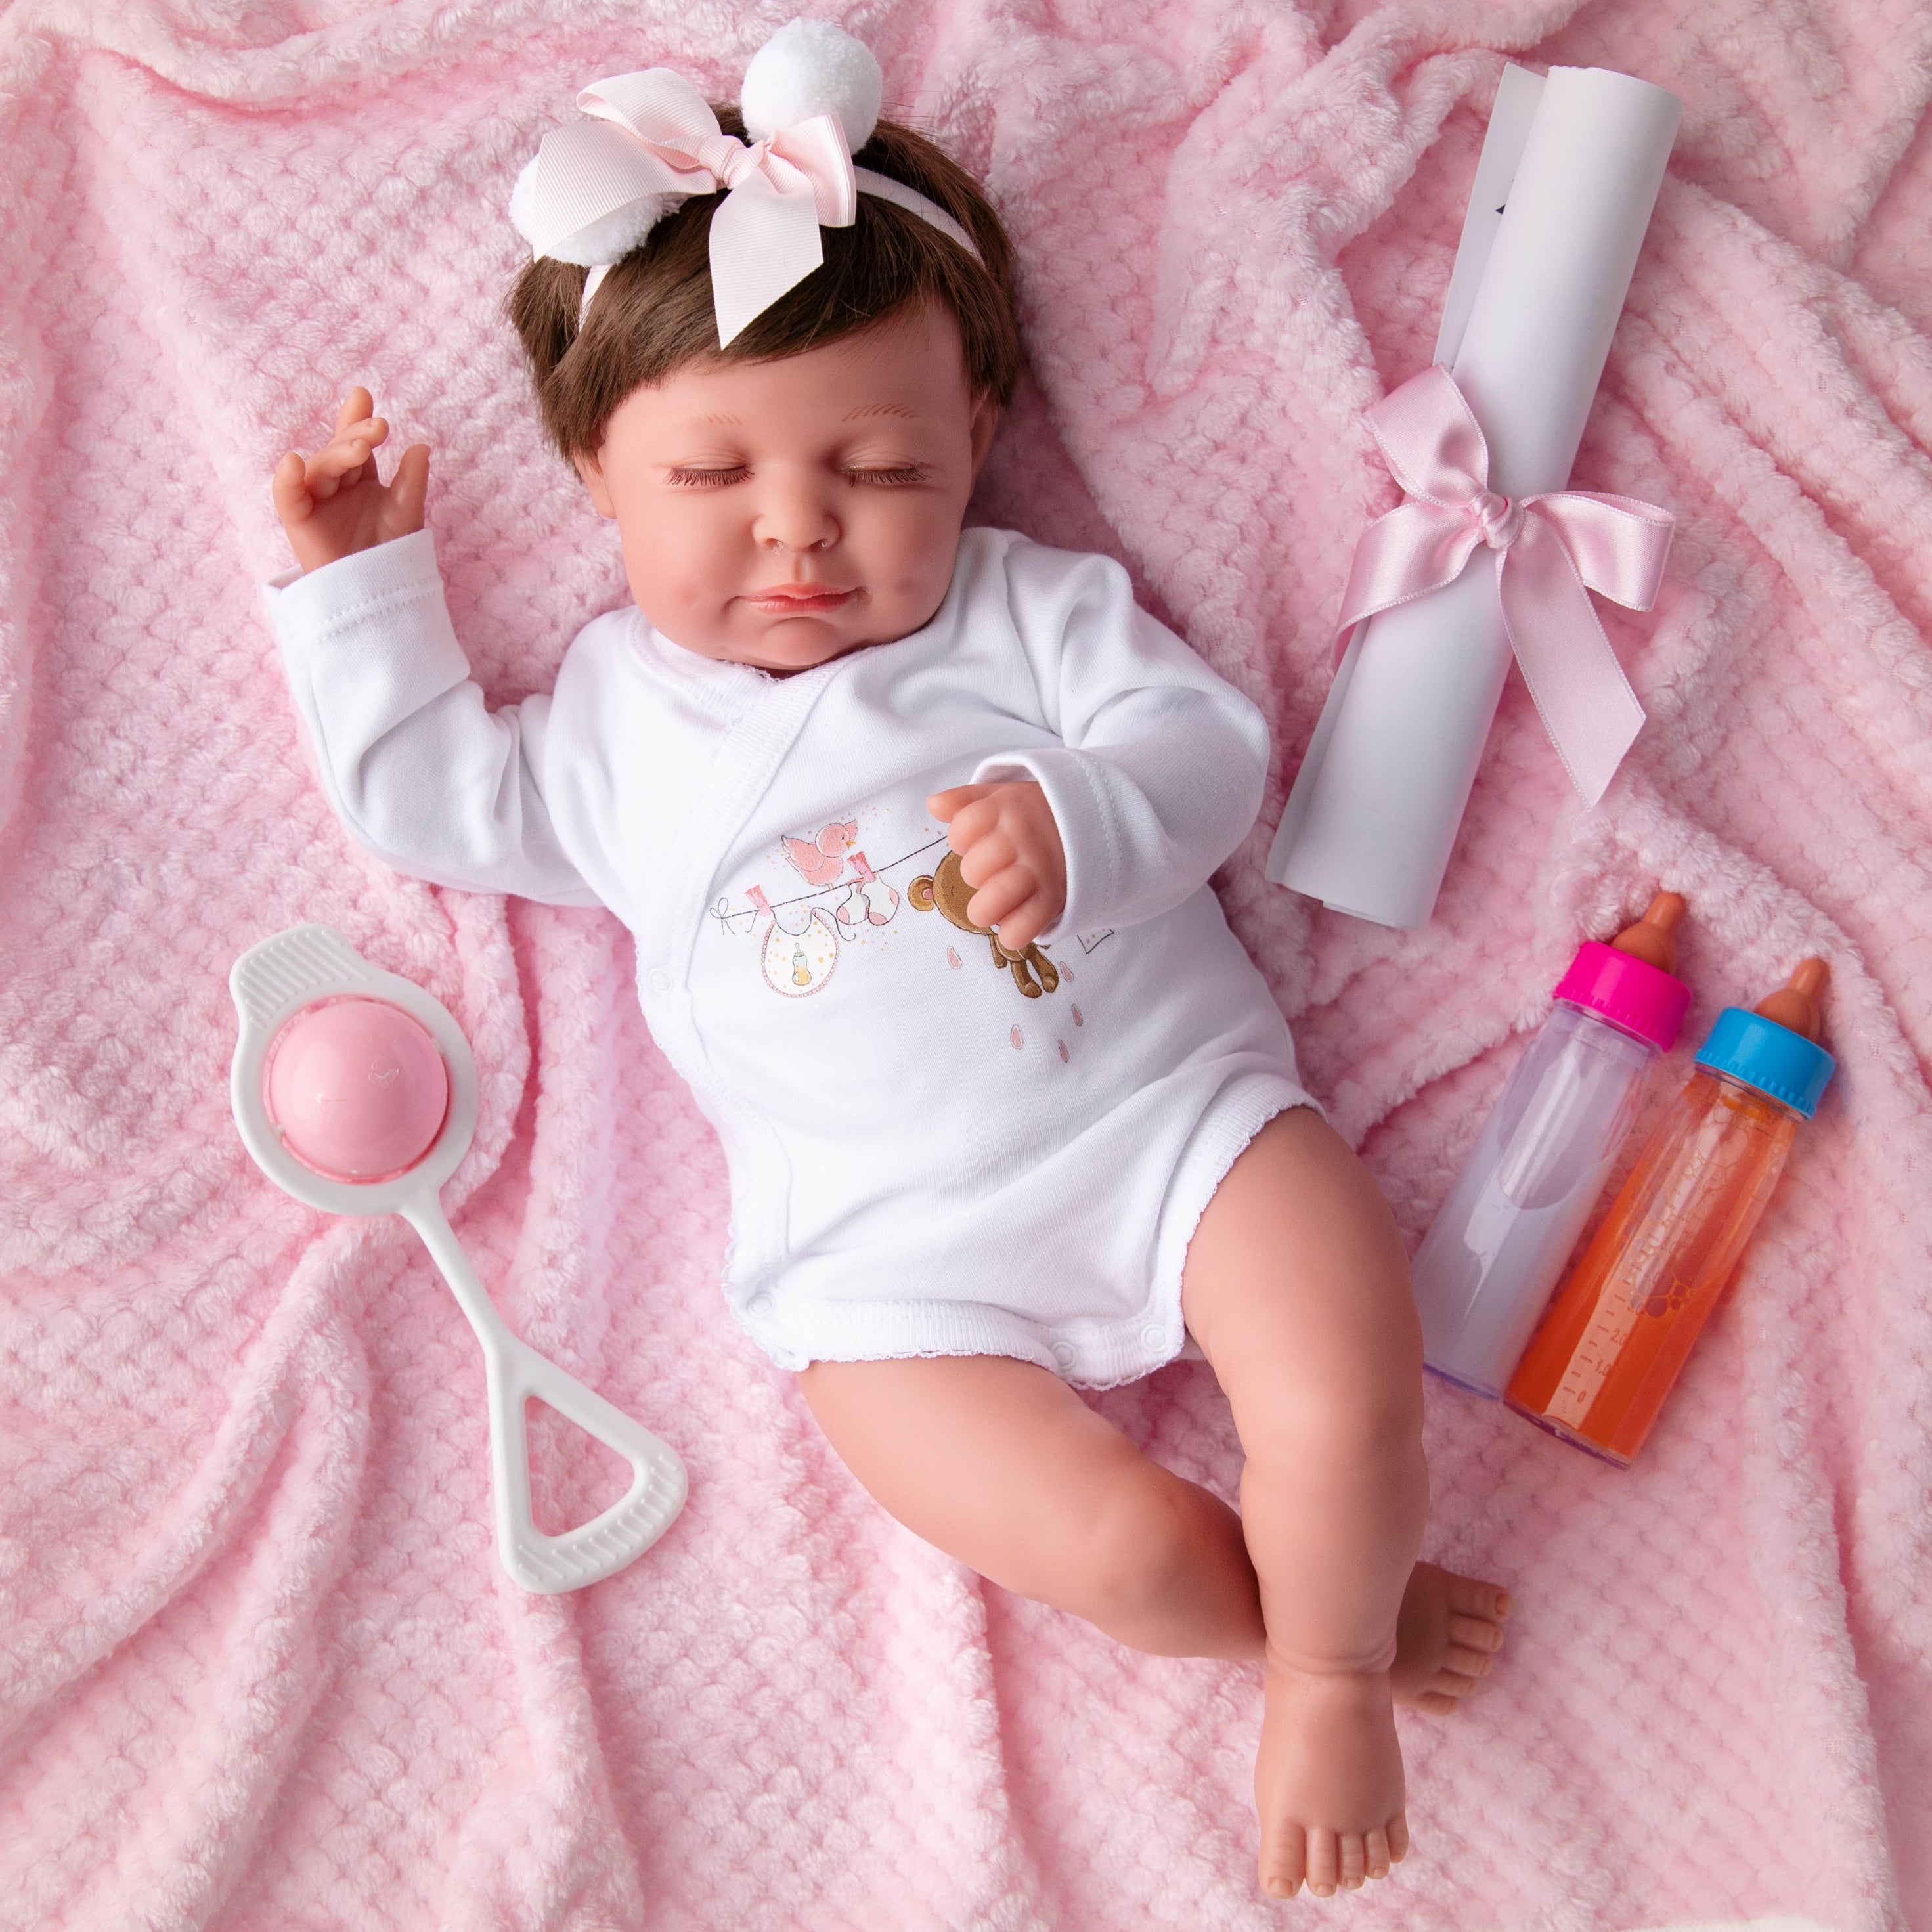 Reborn Baby Doll Reborn Star - 48CM and 2KG - SILICONE VINYL, FALLING HEAD WITH HAIR AND CLOSED EYES